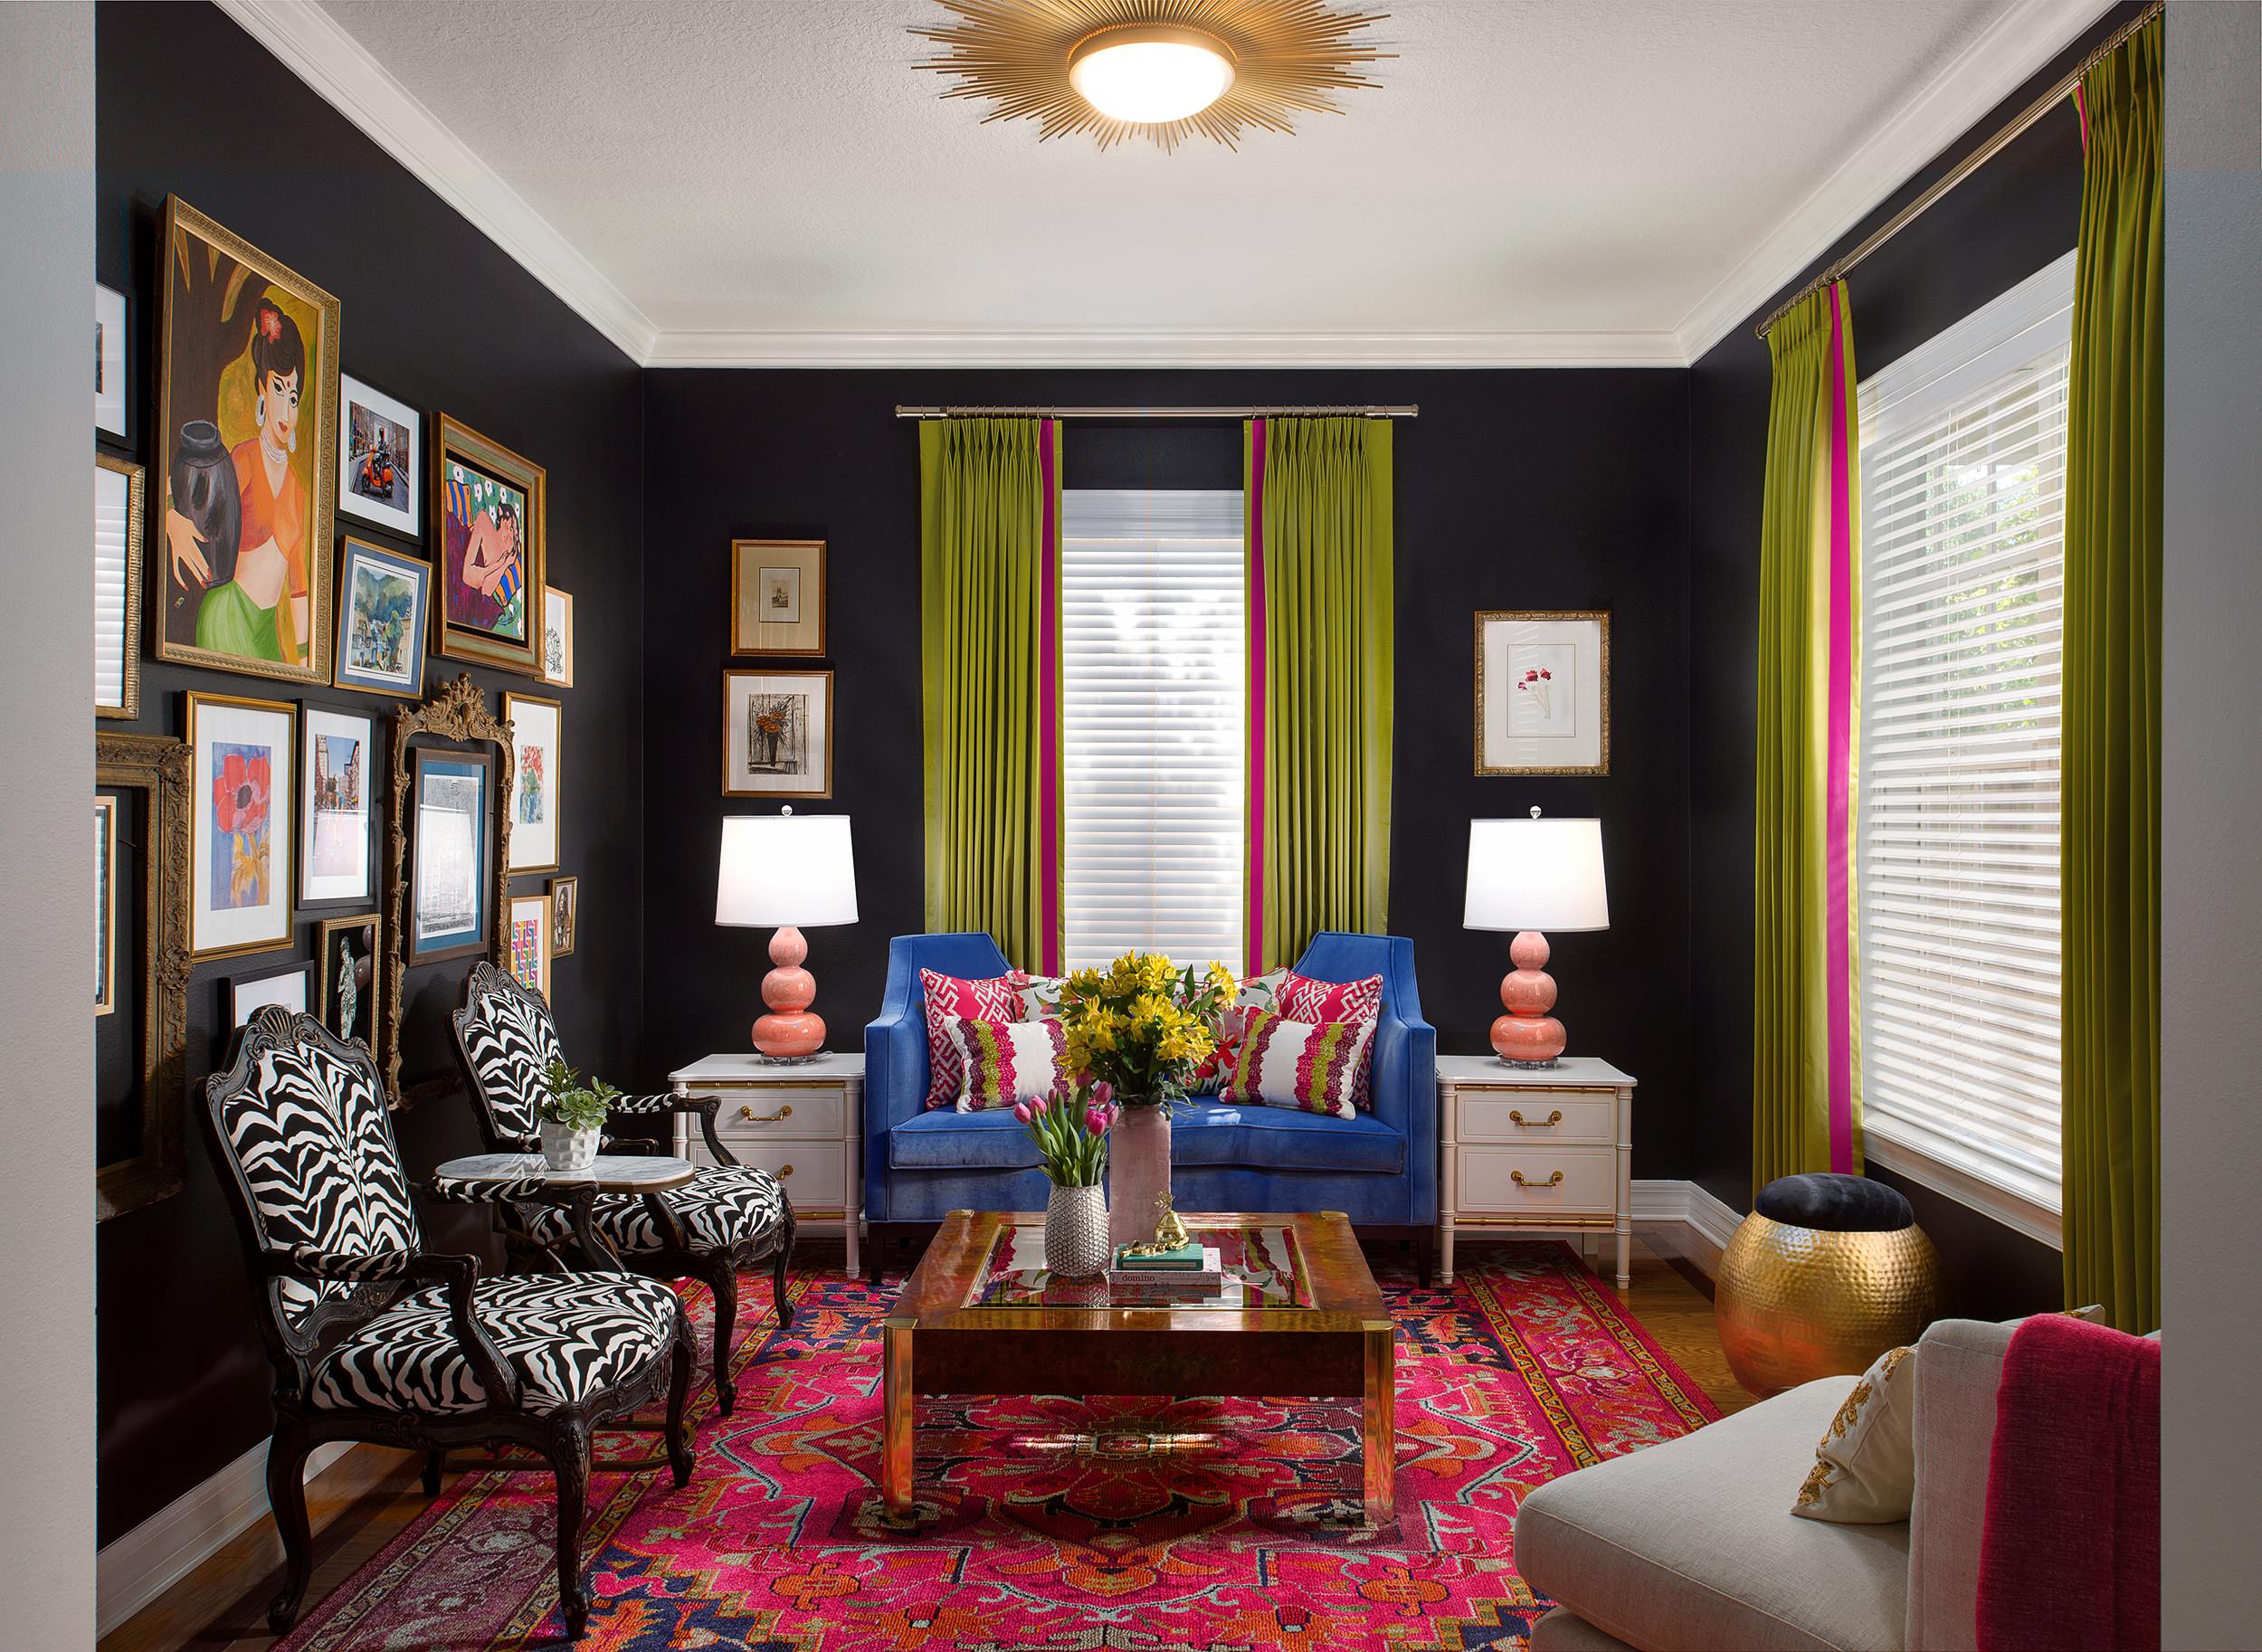 17 Comfy Eclectic Living Room Designs That Are All About The Chic 4 